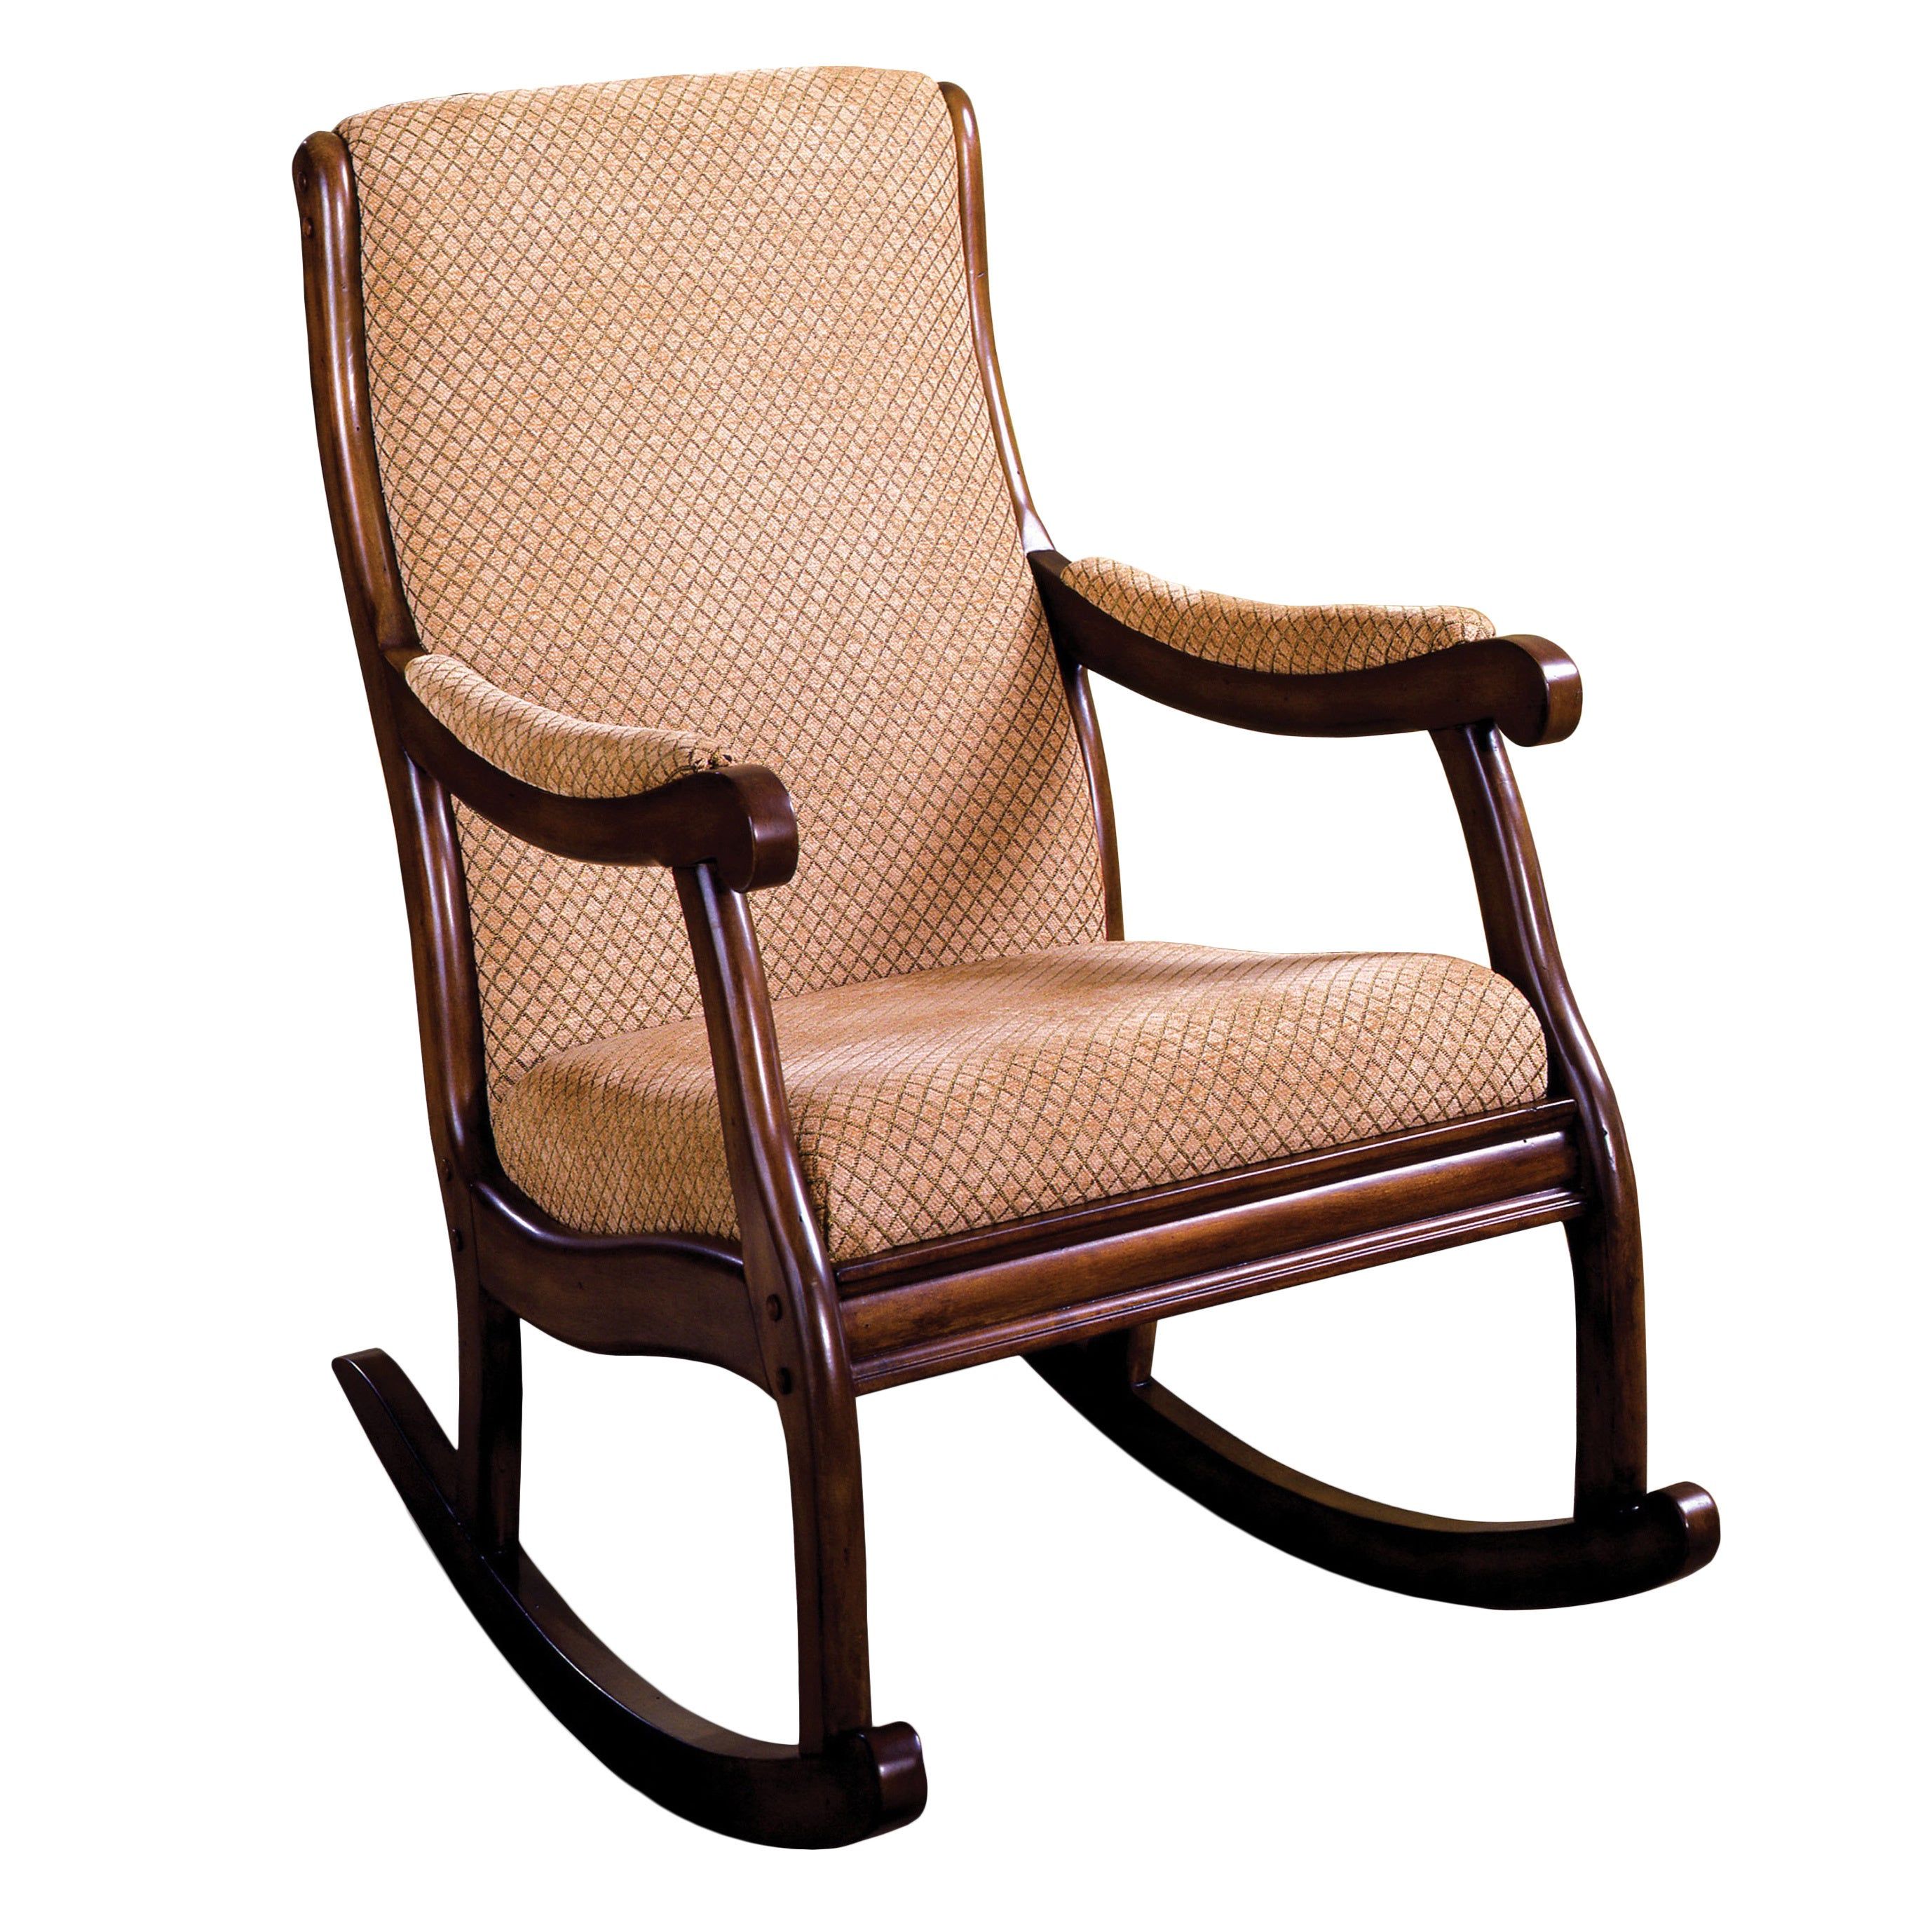 Antique Transitional Warm Oak Rocking Chairfoa With Antique Transitional Warm Oak Rocking Chairs (Photo 3 of 20)